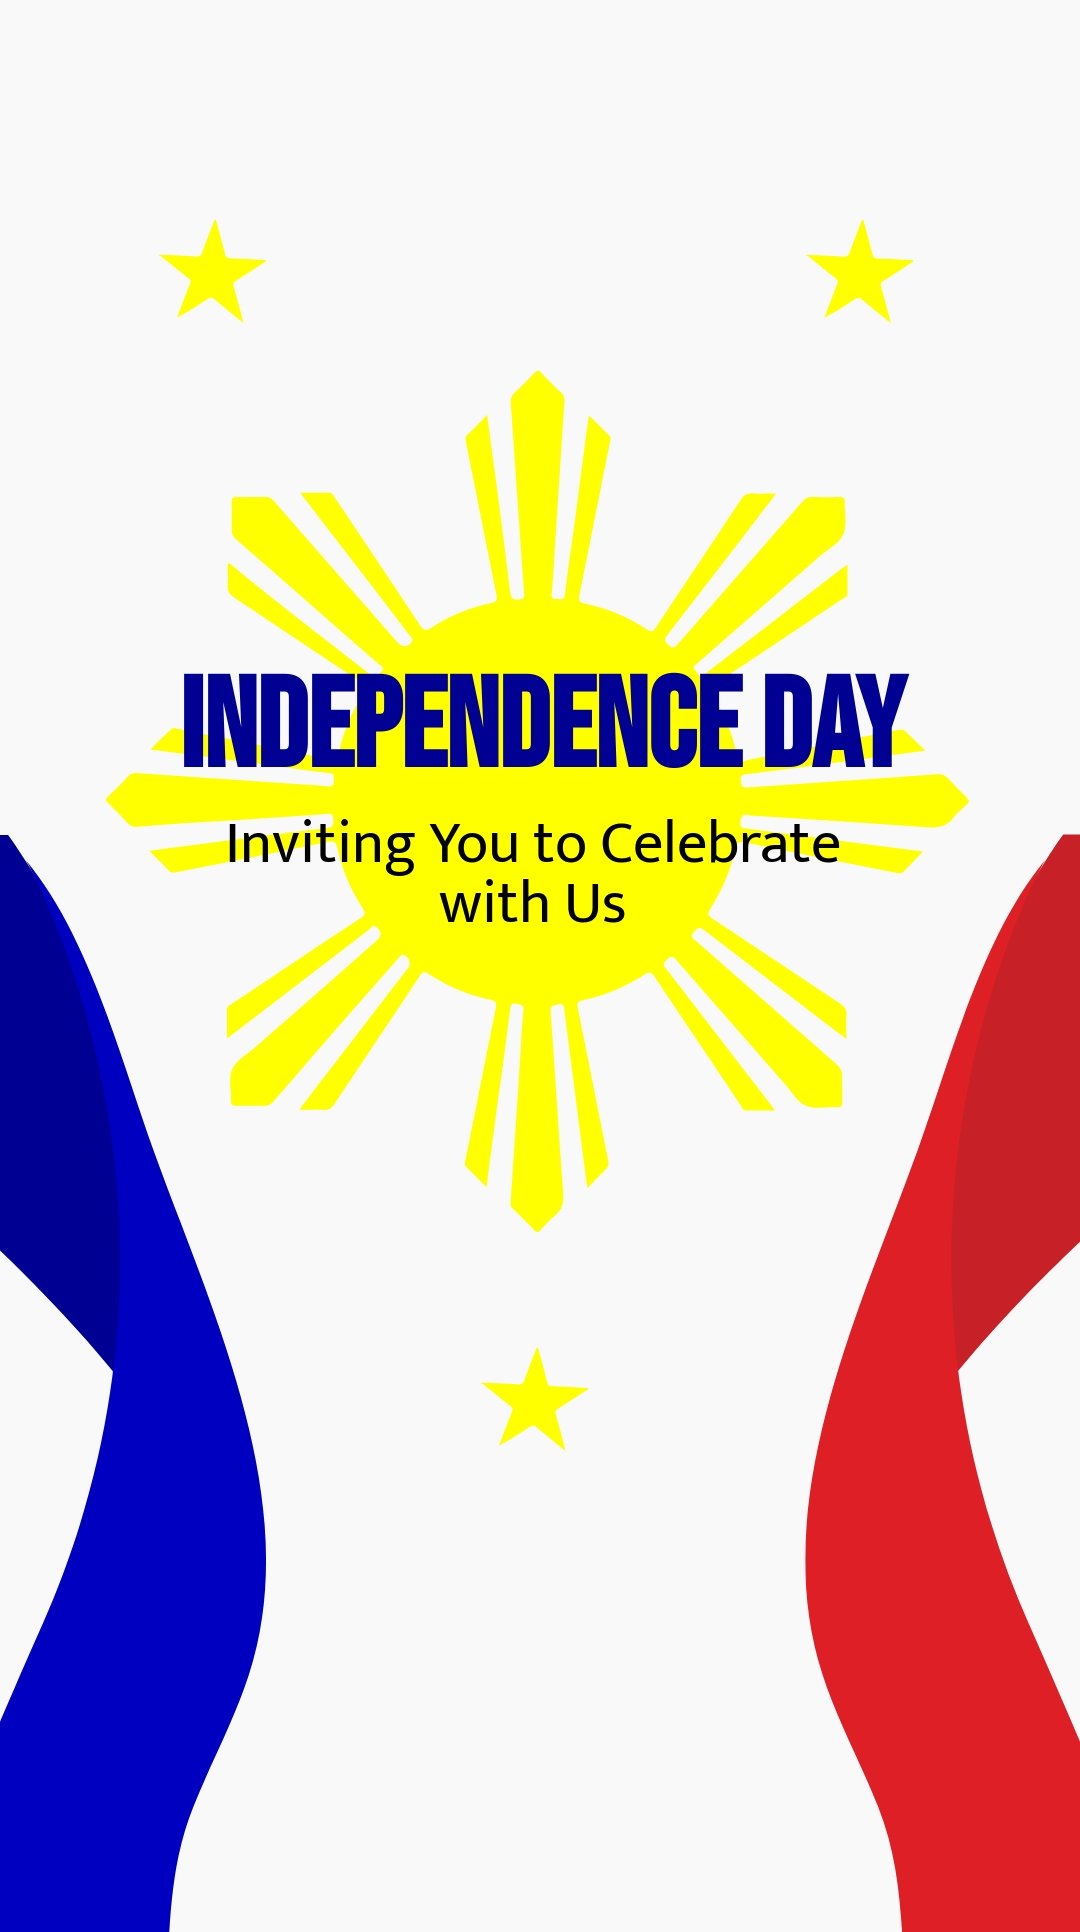 Philippines Independence Day Invitation Instagram Story Template.jpe